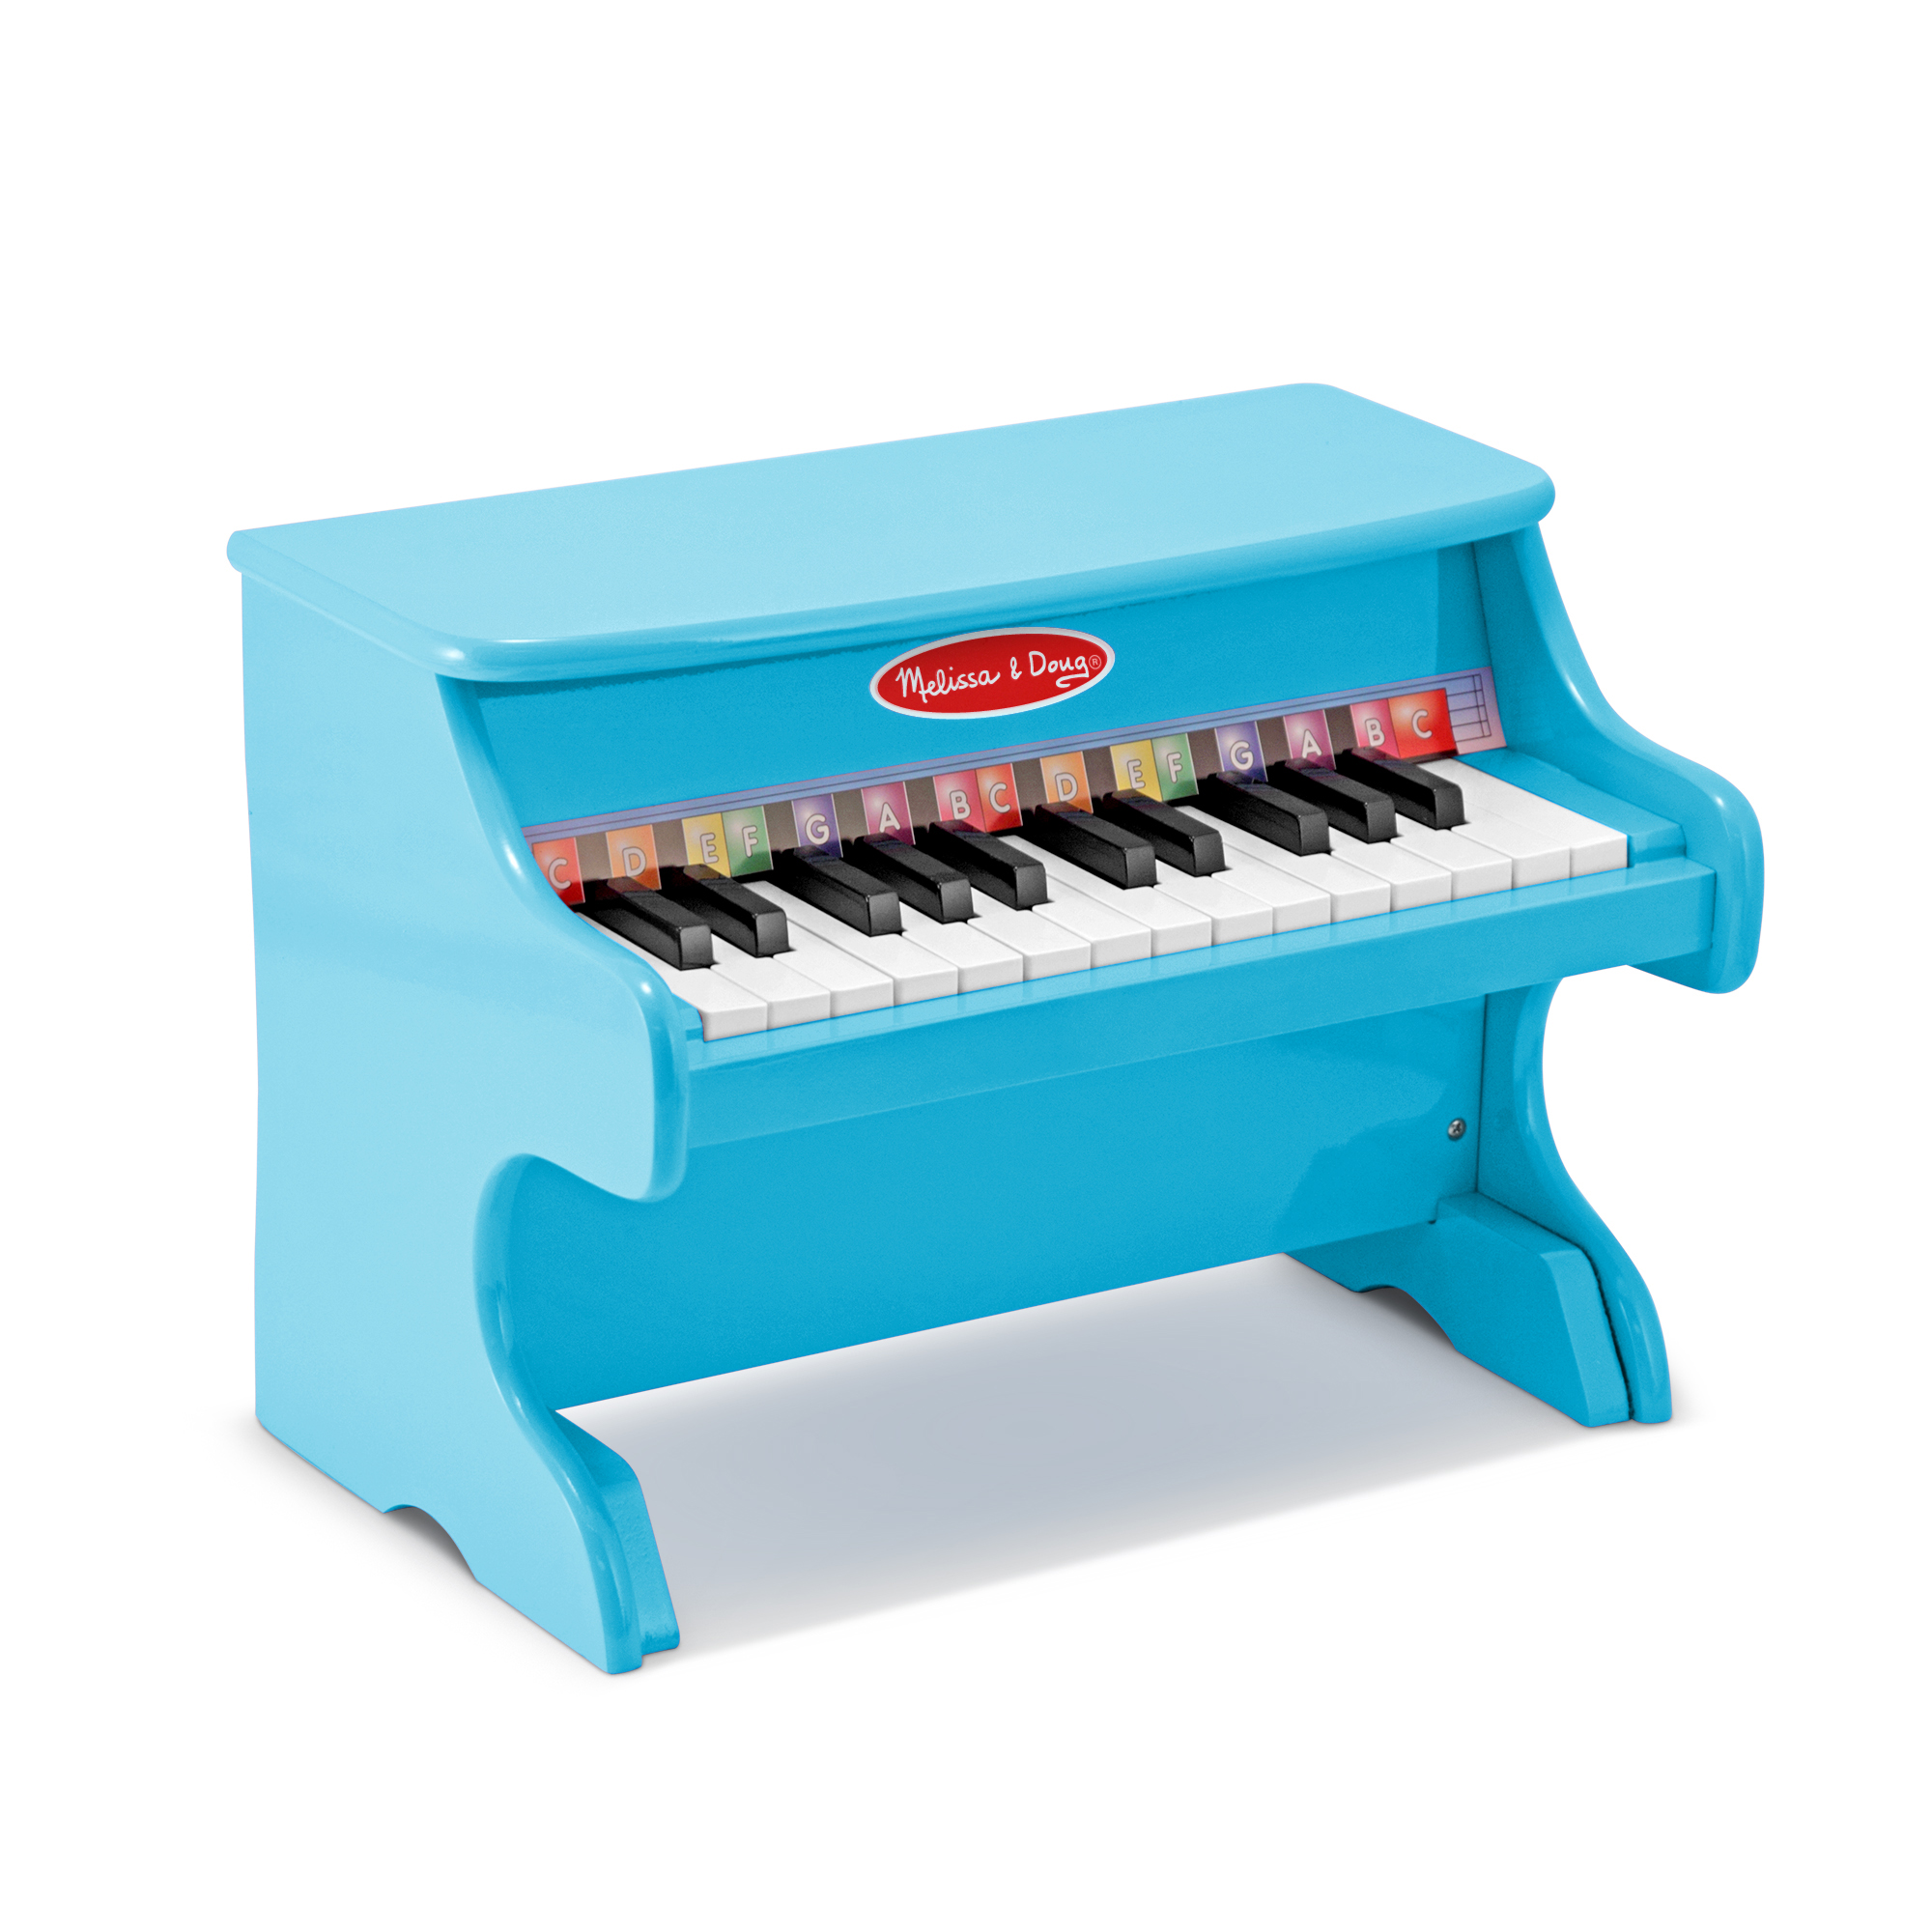 Melissa & Doug Learn-to-Play Piano With 25 Keys and Color-Coded Songbook - Blue - image 1 of 9